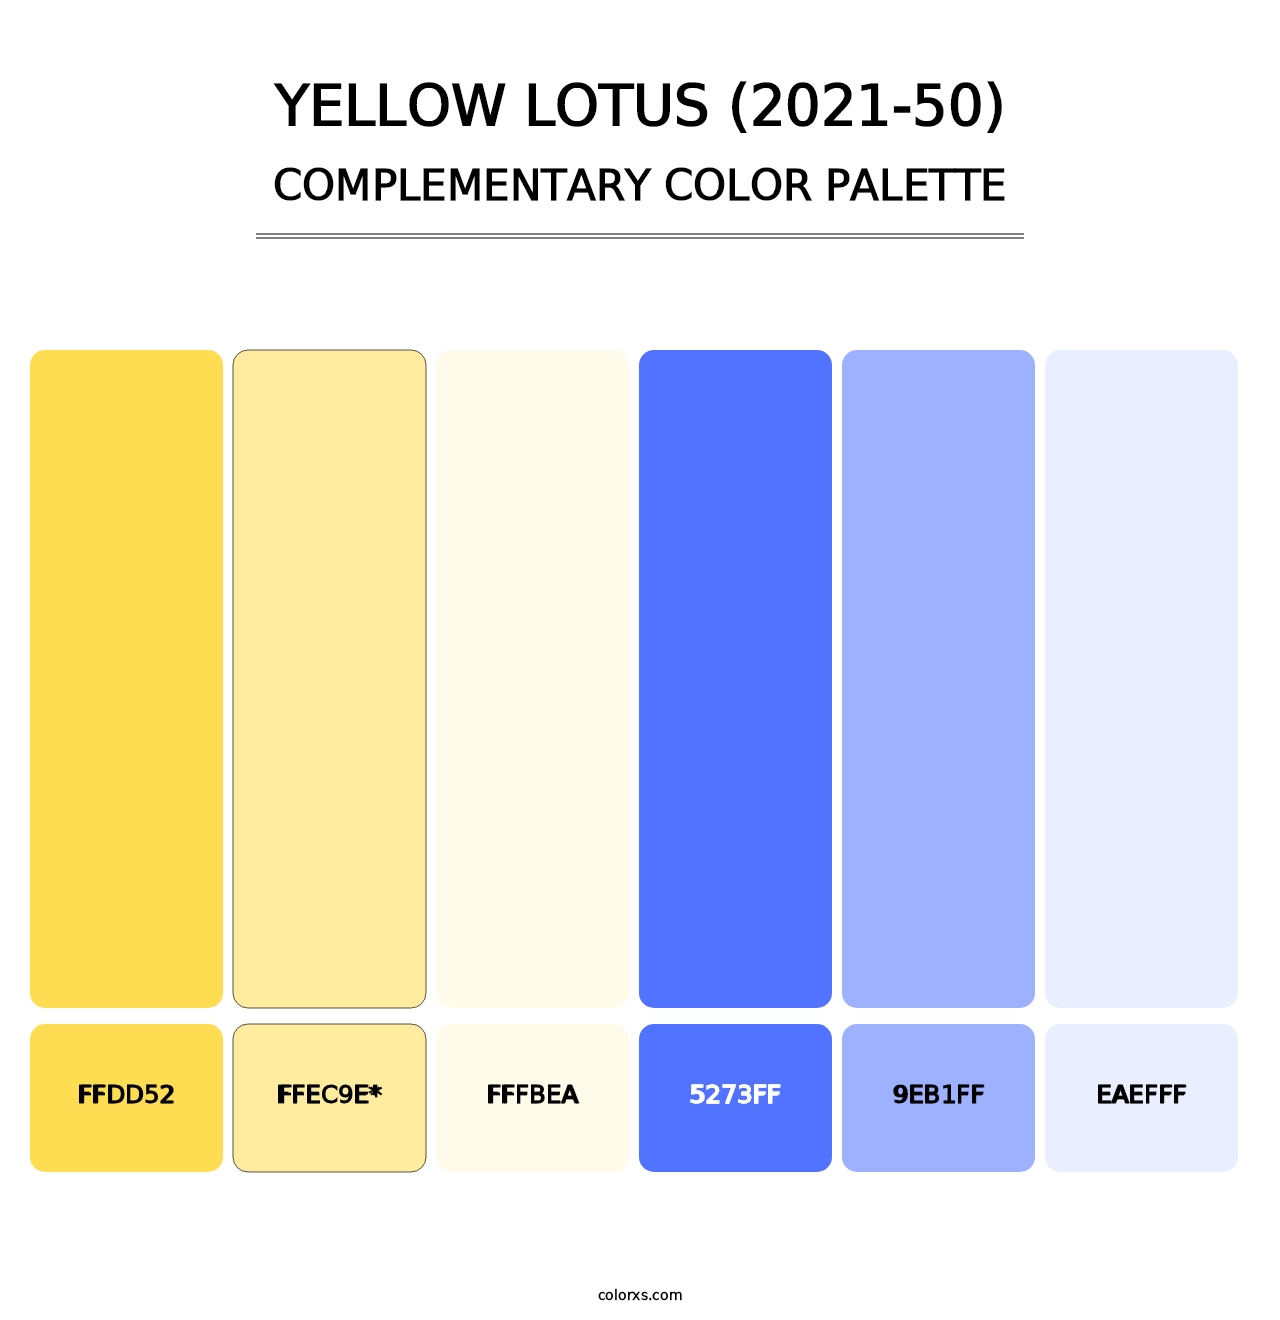 Yellow Lotus (2021-50) - Complementary Color Palette